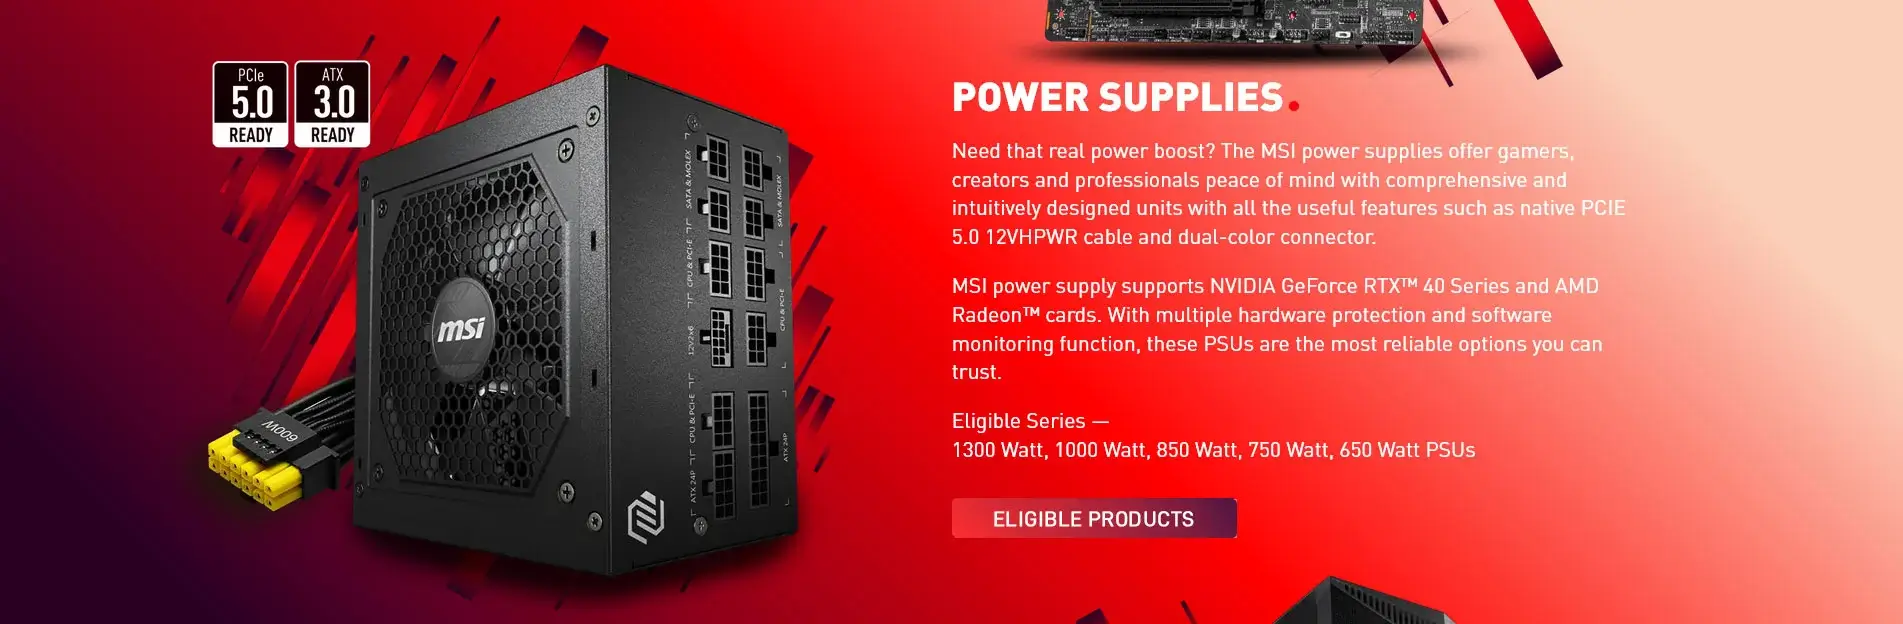 MSI Play With Power Offer SMPS